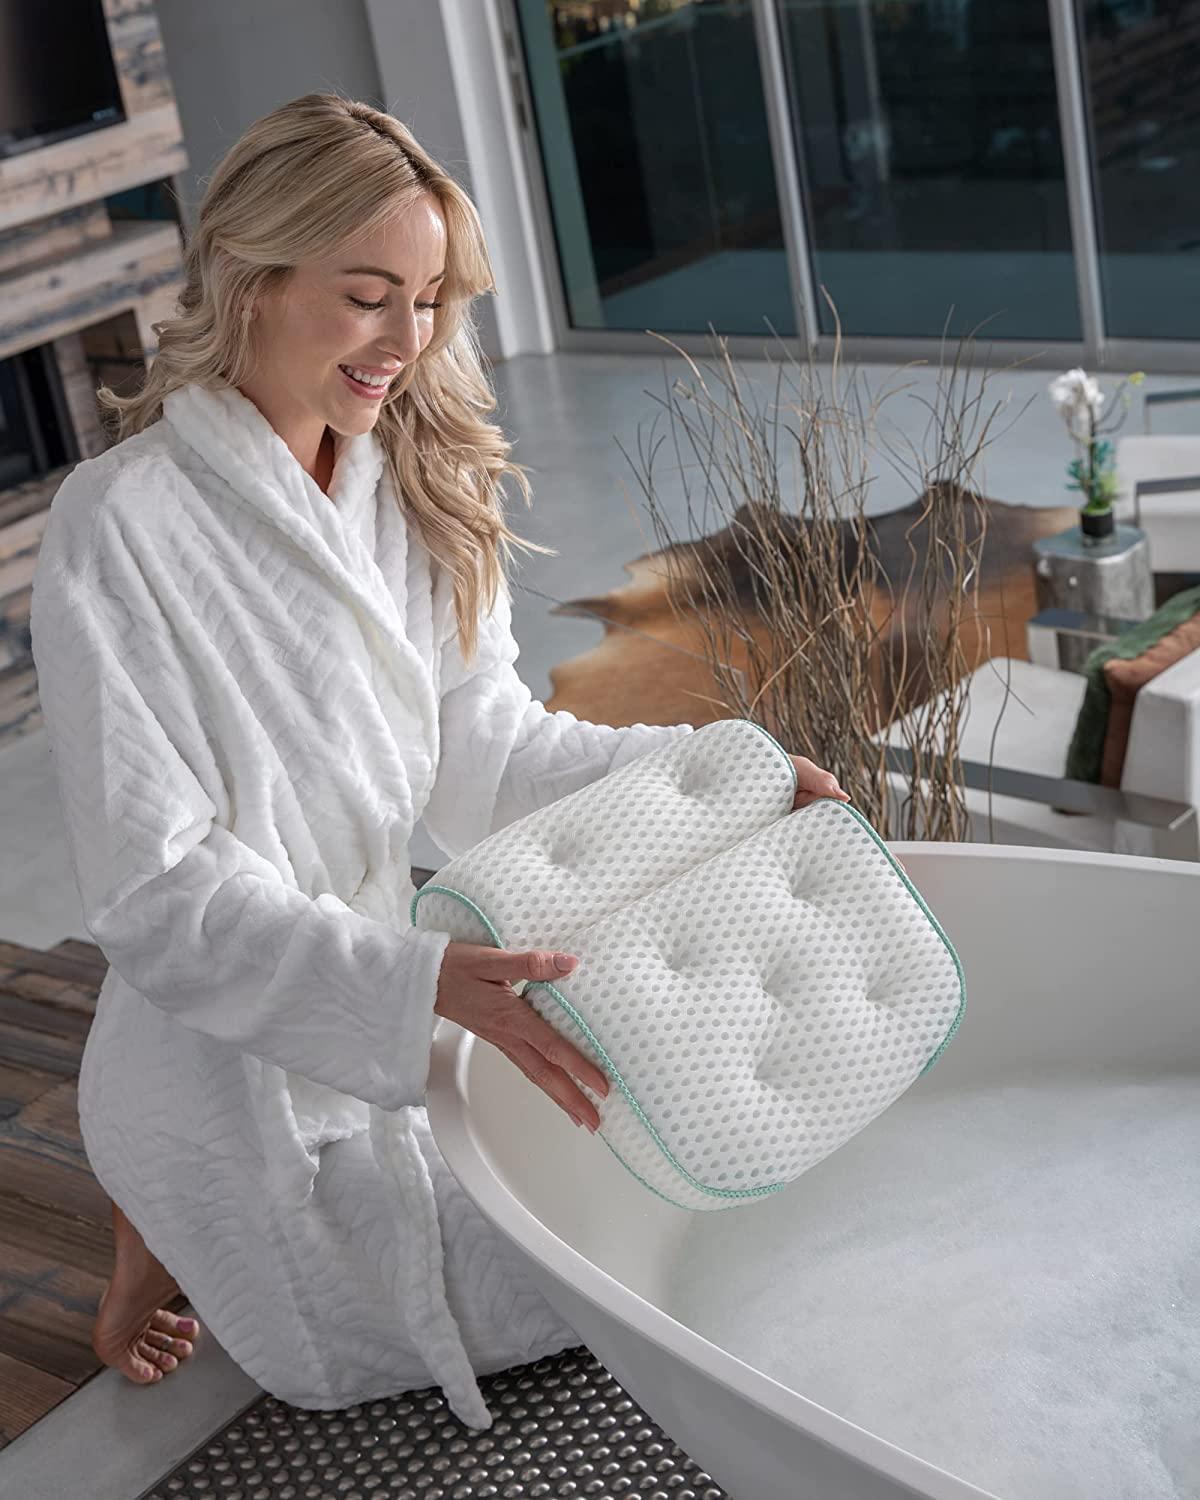 Azmodi Bath Pillow - Soft Comfortable 4D Air Mesh, 7 Slip Resistant Suction  Cups - Bathtub Pillows for Tub Neck and Back Support, Bathing Spa Shower  Gifts